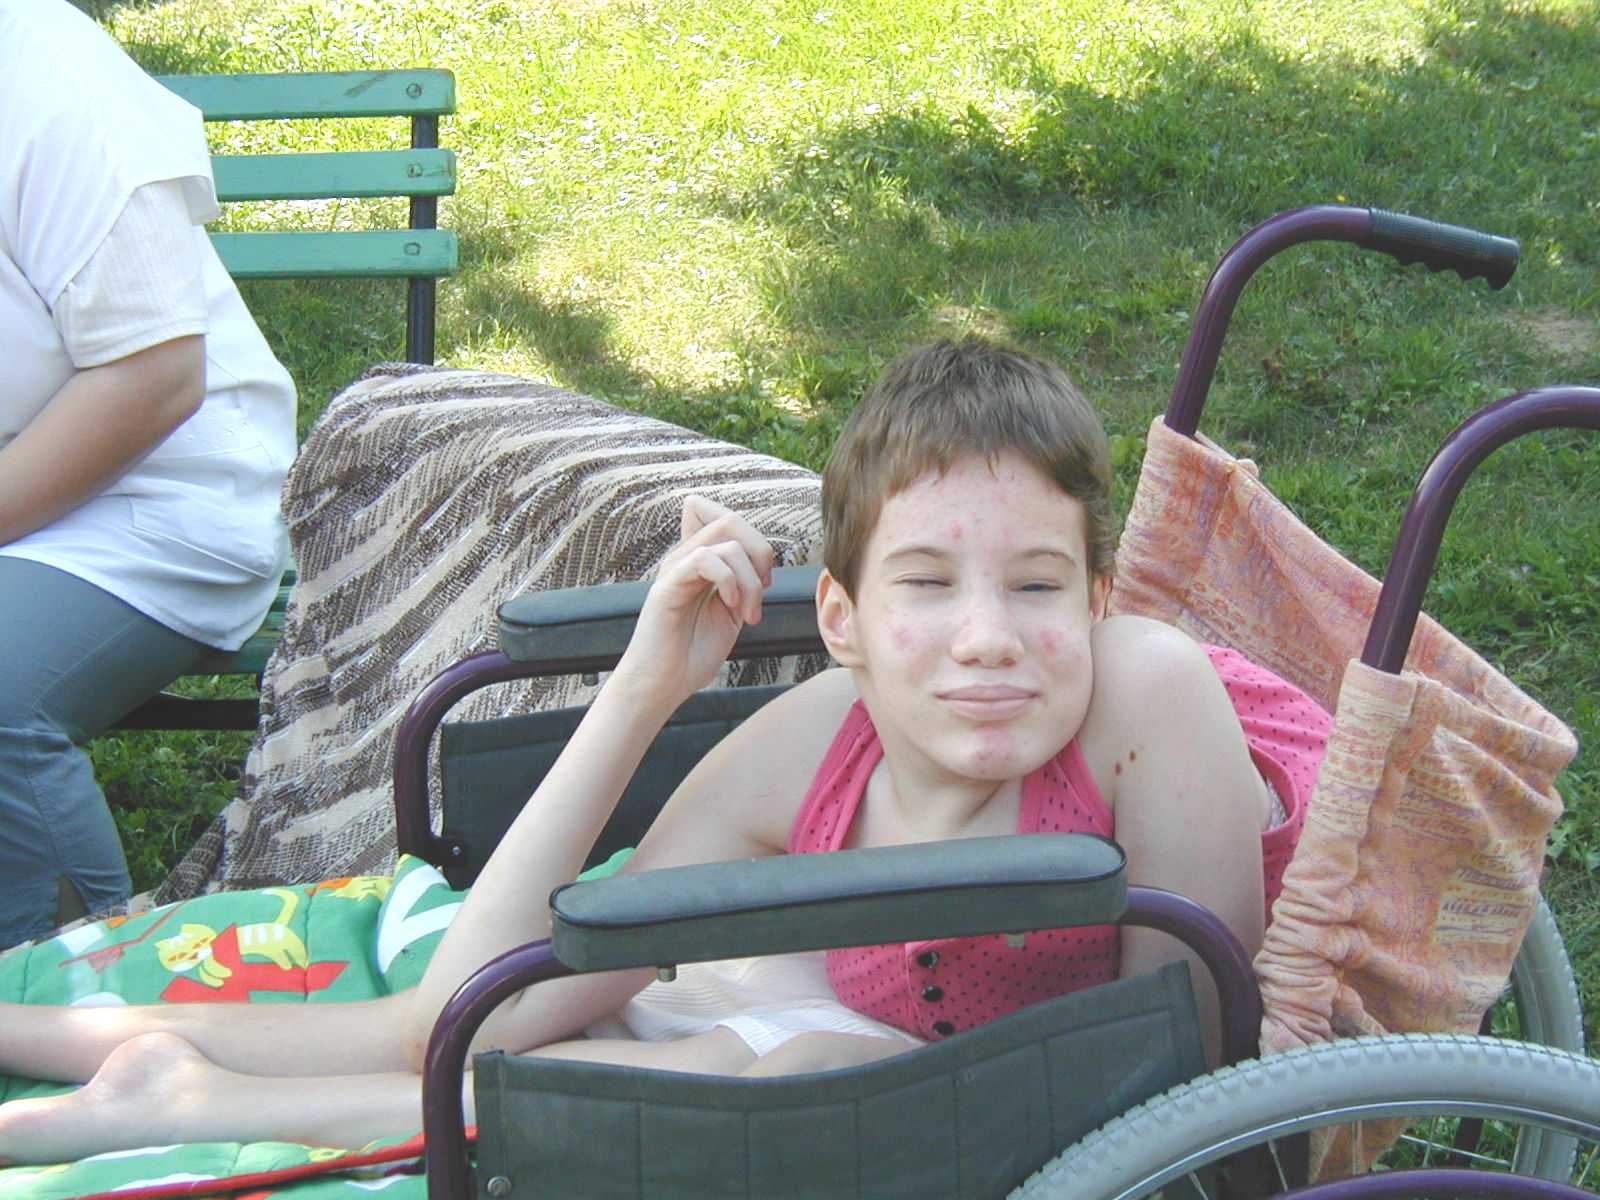 A teenage sitting in a wheelchair provided by Hands that Help.